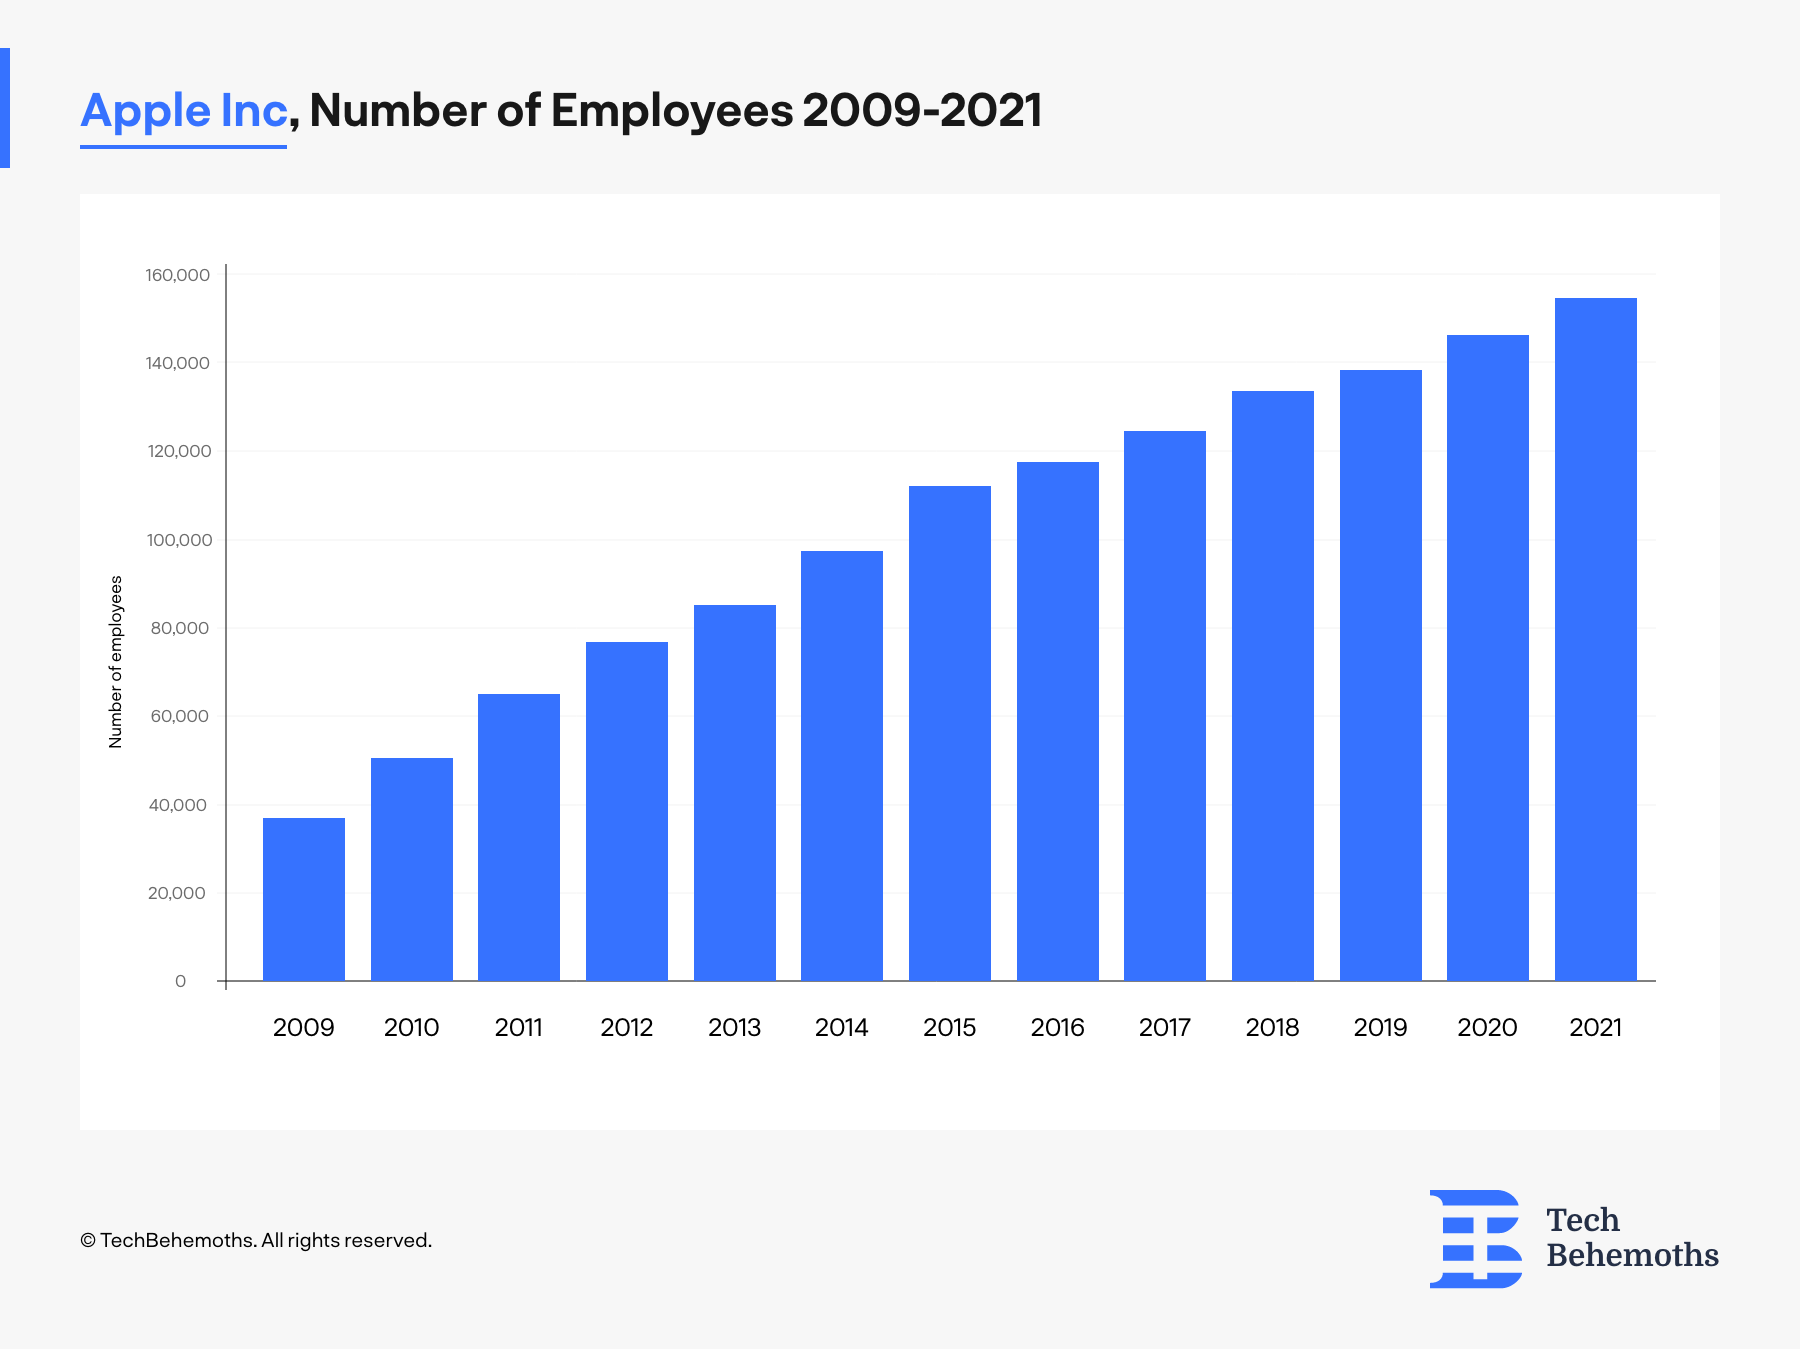 data about the number of employees that Apple Inc. has between 2009-2021